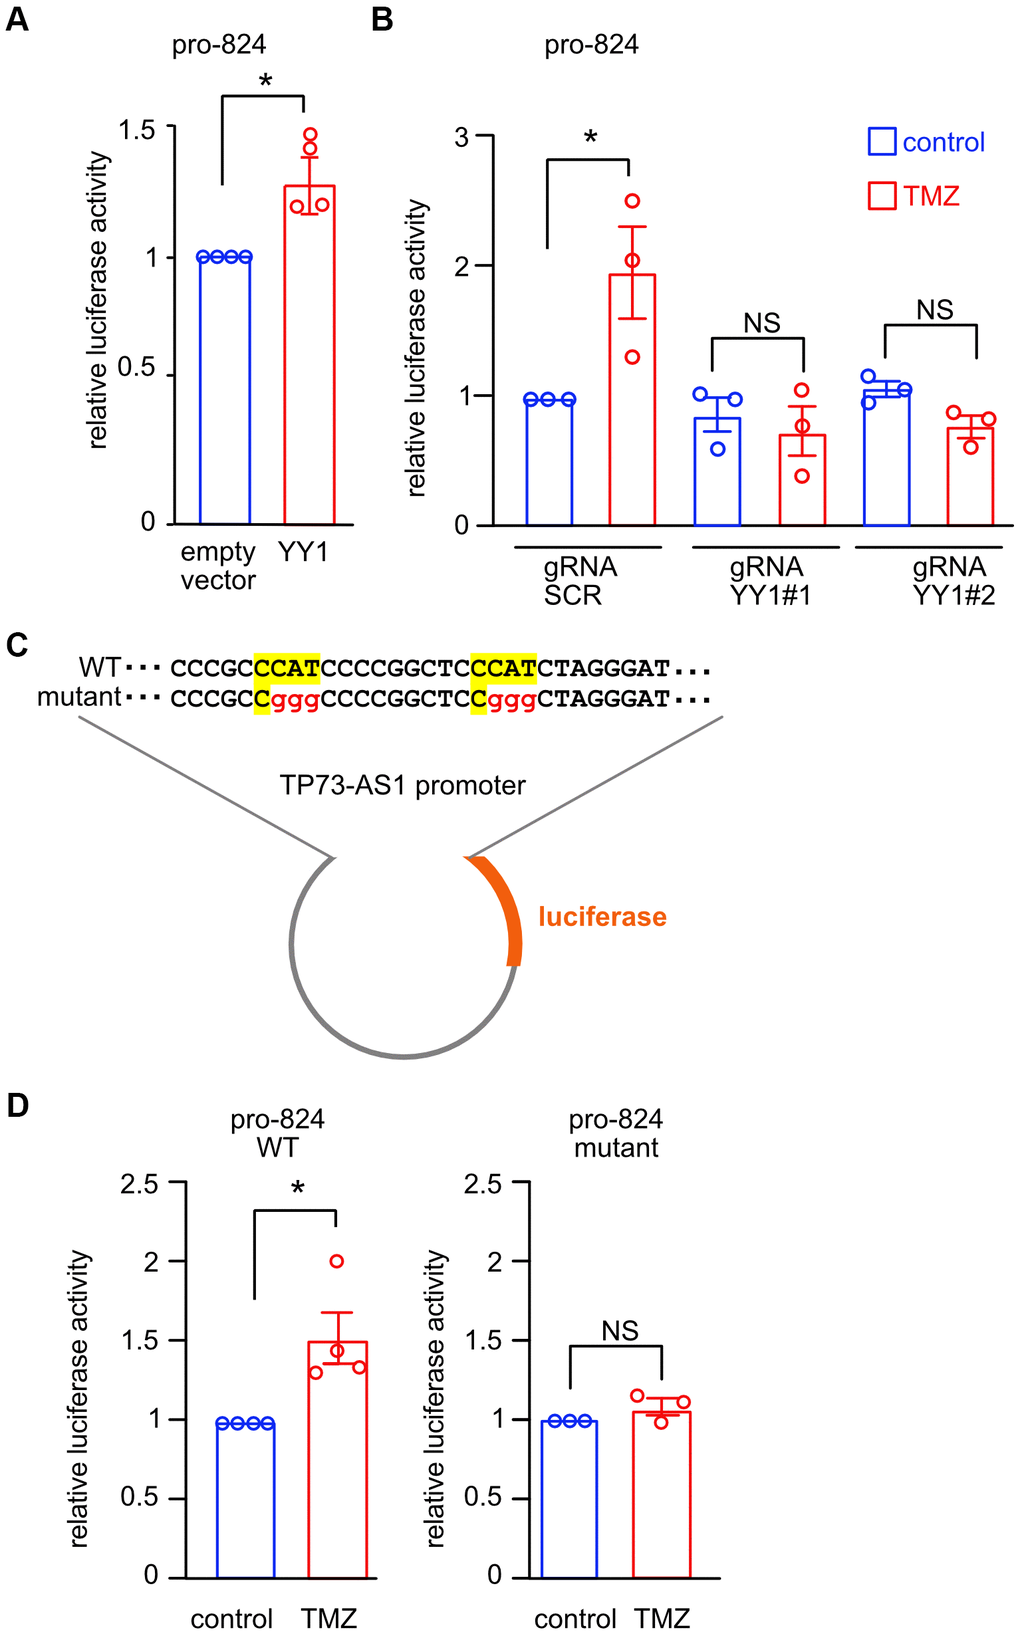 YY1 directly promotes TP73-AS1 promoter activation. (A) The indicated promoter activity was measured in SHY5Y cells over expressing YY1 or empty vector. * pB) CRISPRi SHY5Y cells were treated with DOX for 10 days to induce YY1 KD. Cells were treated with TMZ (750 μM for 48 hours). The activity of TP73-AS1-promoter-824 was measured using the dual luciferase assay. * pC) Schematic representation of the WT or mutant YY1 binding sites within the TP73-AS1 promoter luciferase construct. (D) SHY5Y cells expressing WT or mutant promoter were treated with TMZ or DMSO control for 48 hours after which promoter activity was measured using dual luciferase assay. * p